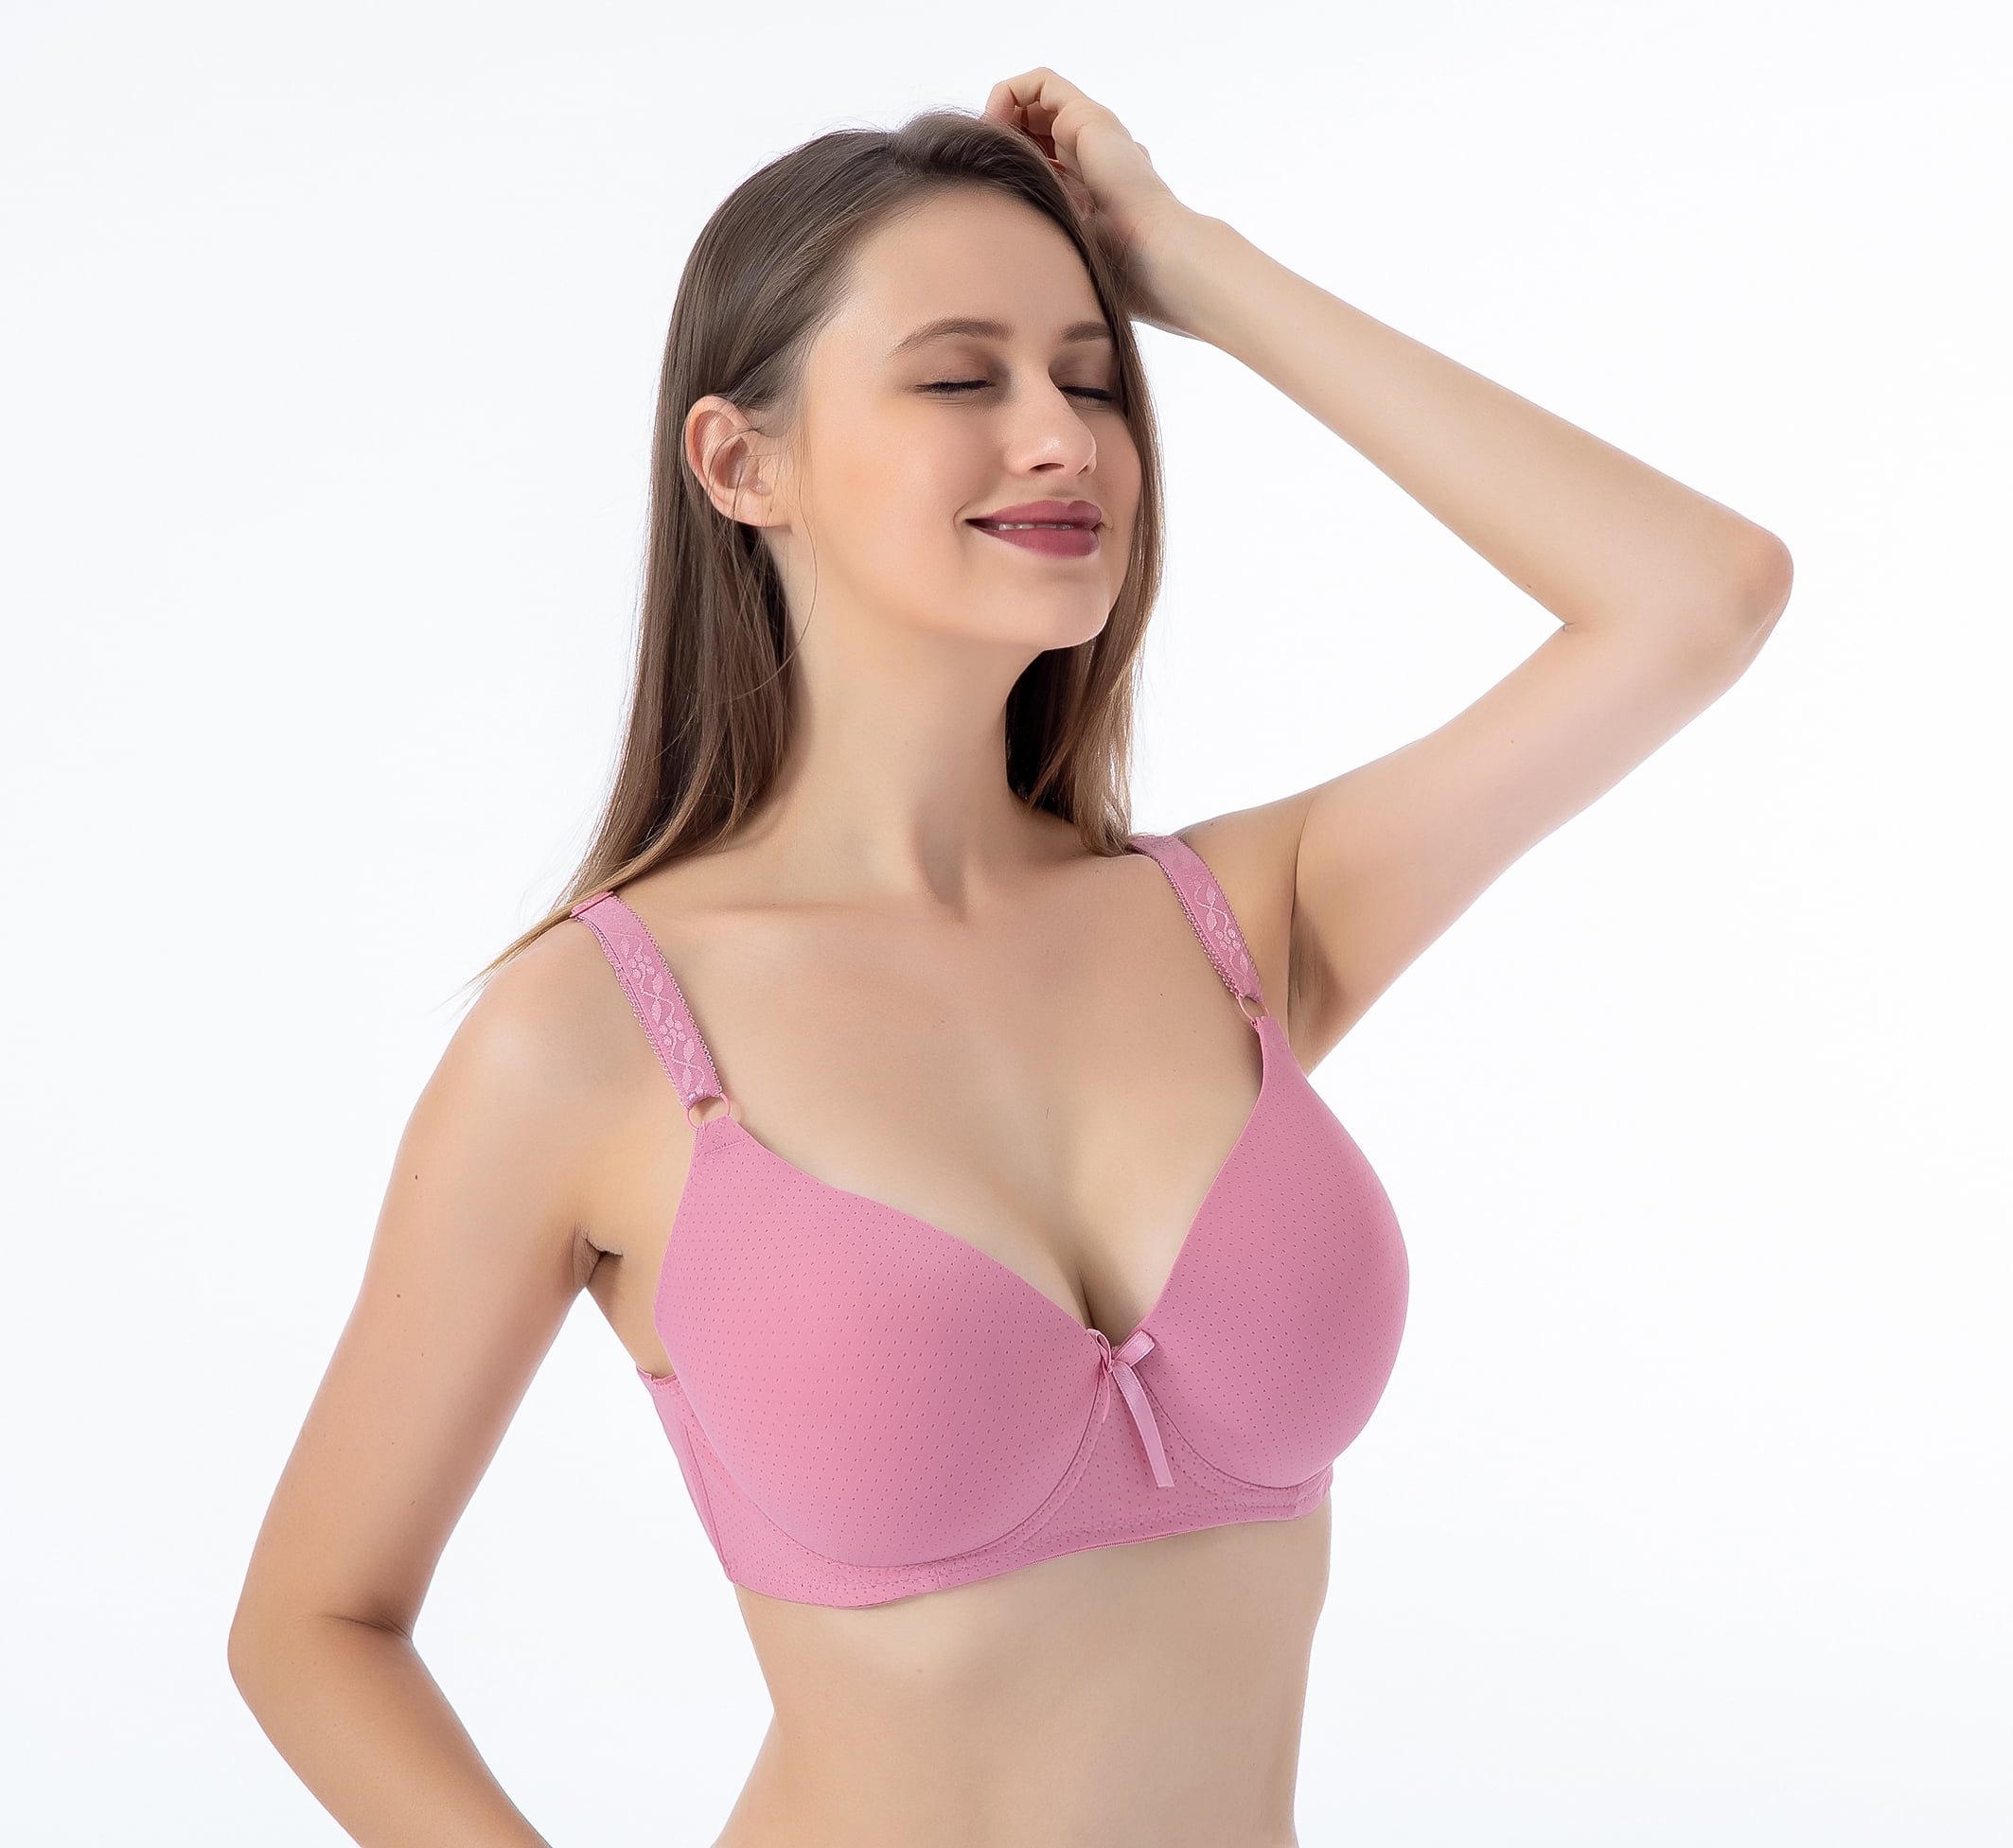 Women Bras 6 Pack of Bra B cup C cup D cup DD cup Size 38D (C8208)